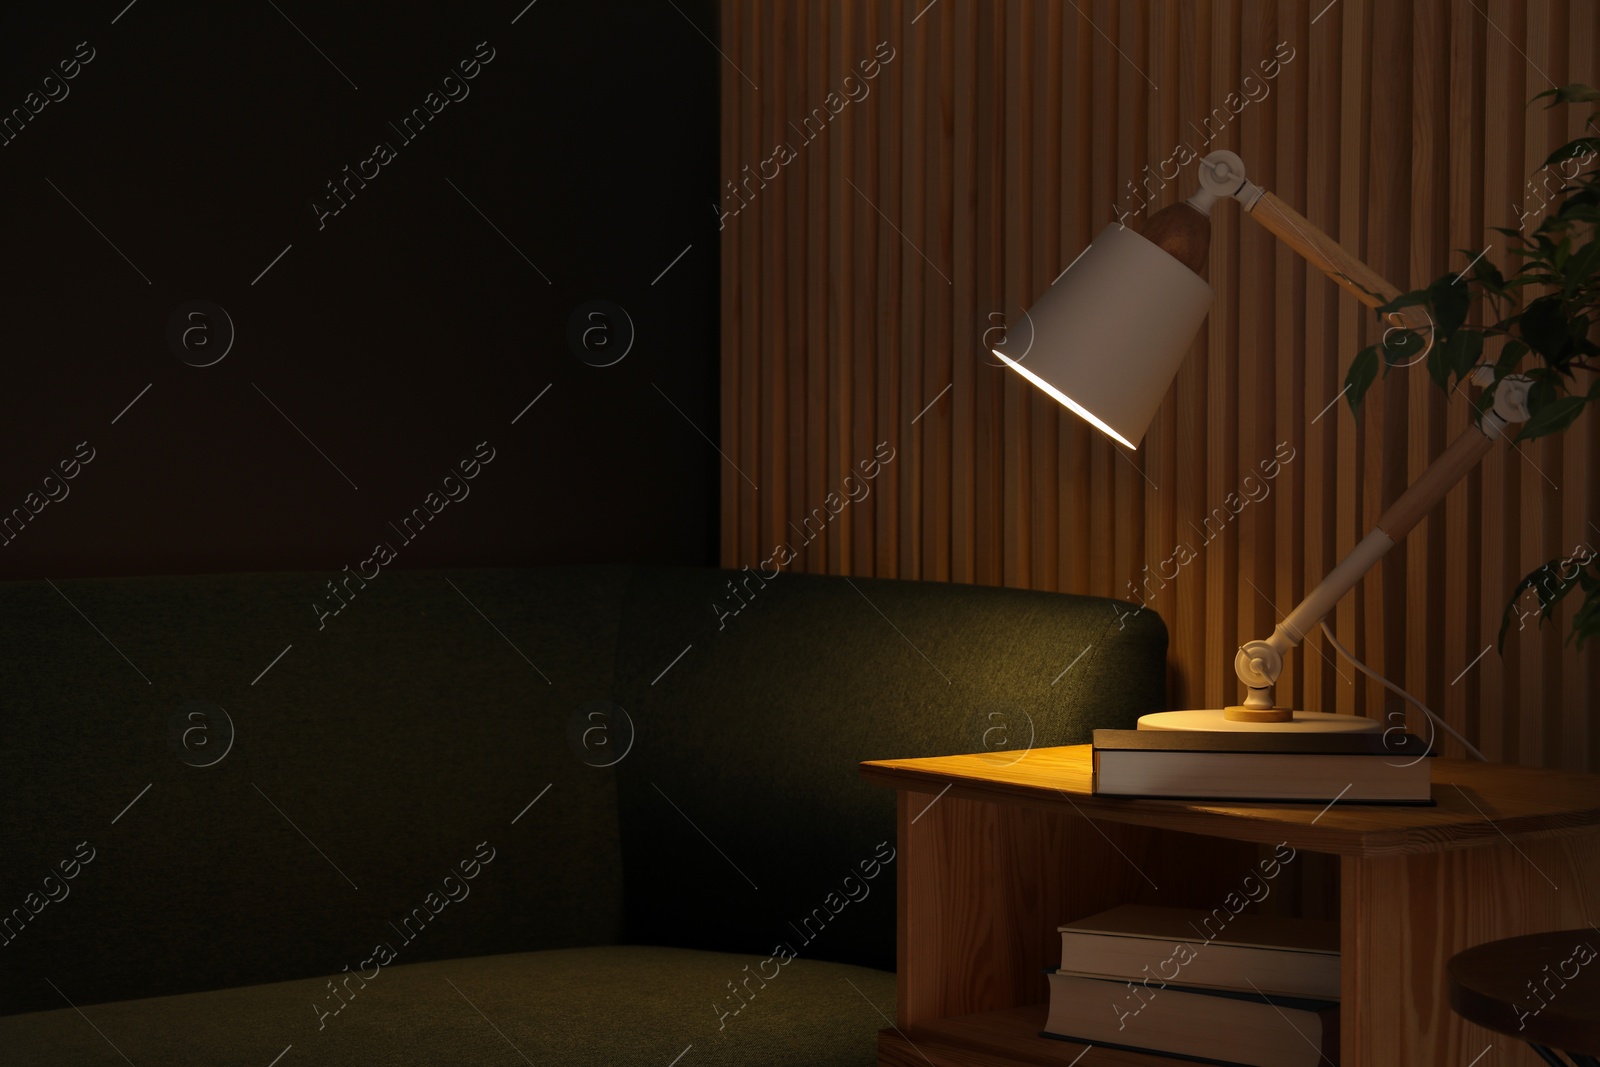 Photo of Stylish modern desk lamp and book on wooden cabinet in living room